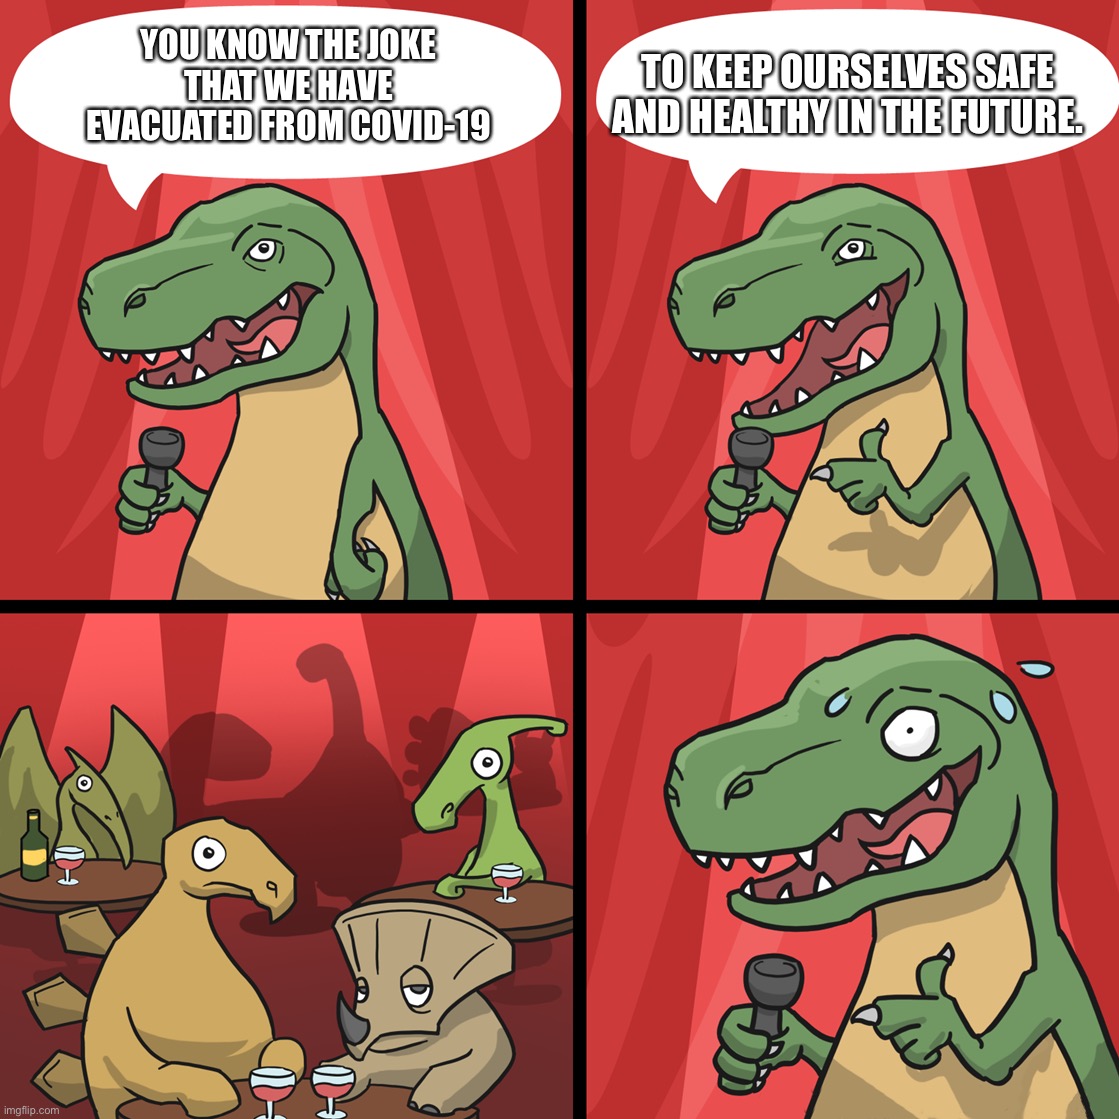 bad joke trex | TO KEEP OURSELVES SAFE AND HEALTHY IN THE FUTURE. YOU KNOW THE JOKE THAT WE HAVE EVACUATED FROM COVID-19 | image tagged in bad joke trex,dinosaurs,memes | made w/ Imgflip meme maker